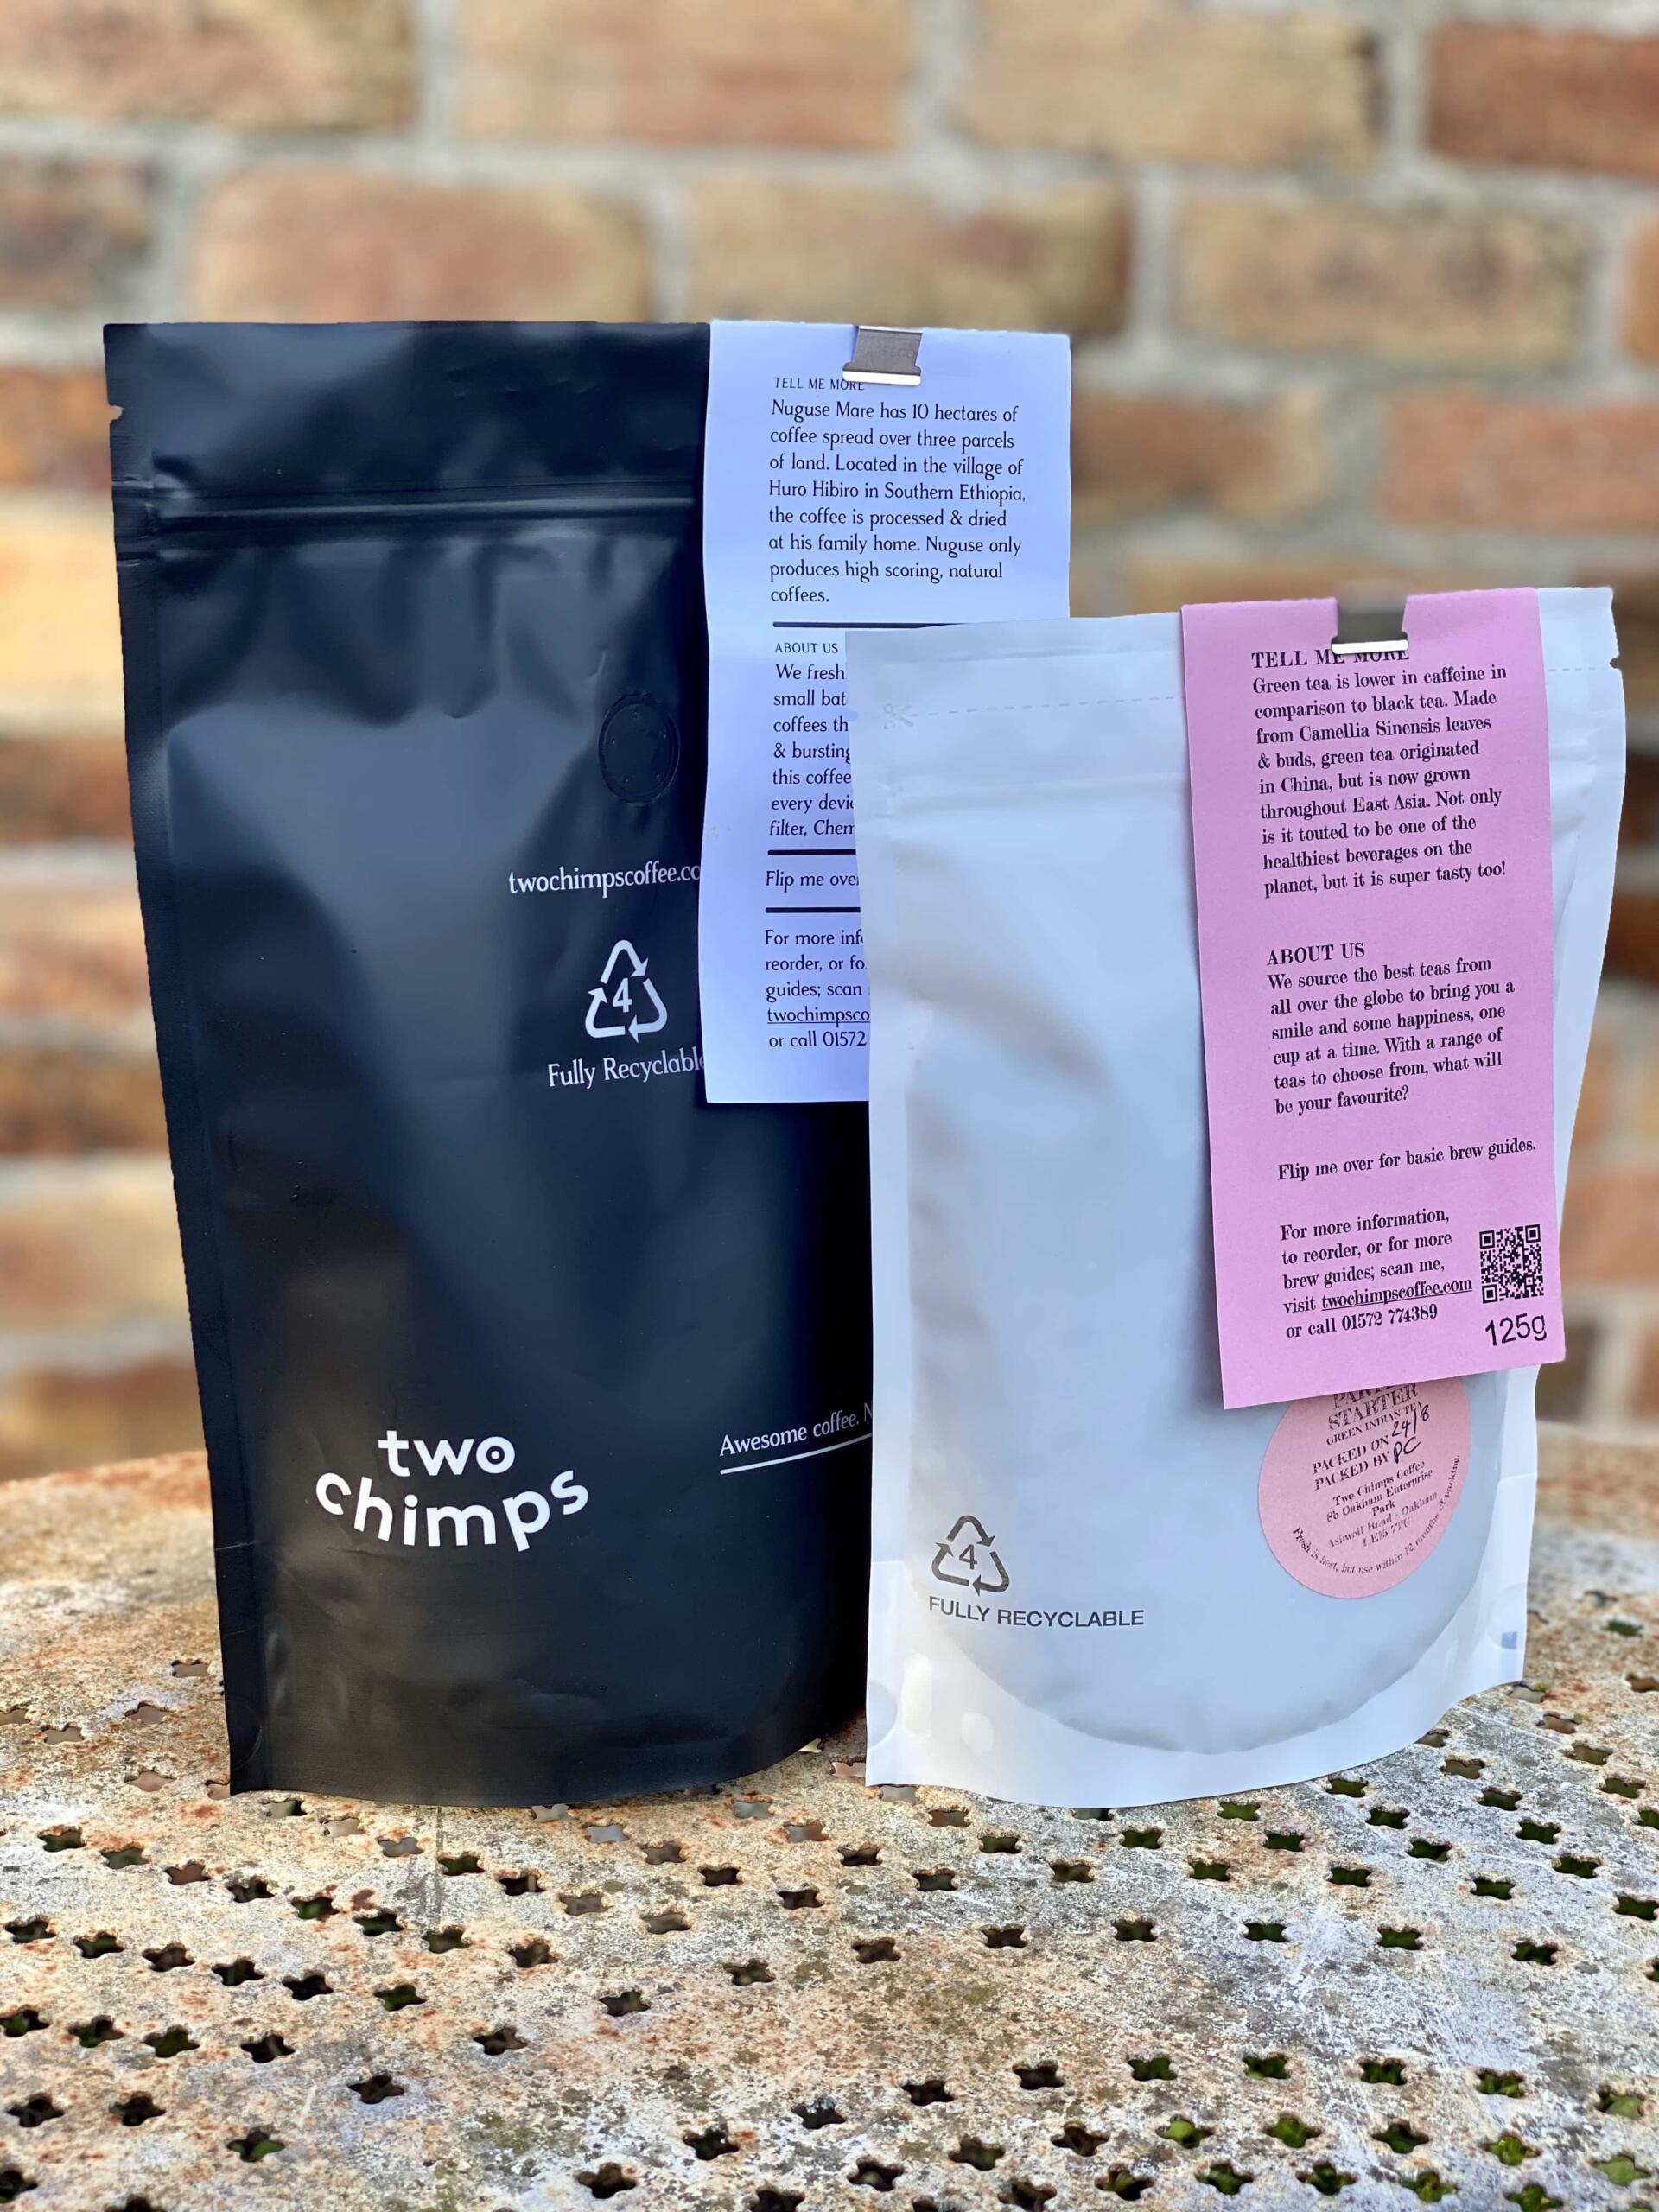 Two Chimps Recyclable Coffee and Tea packaging